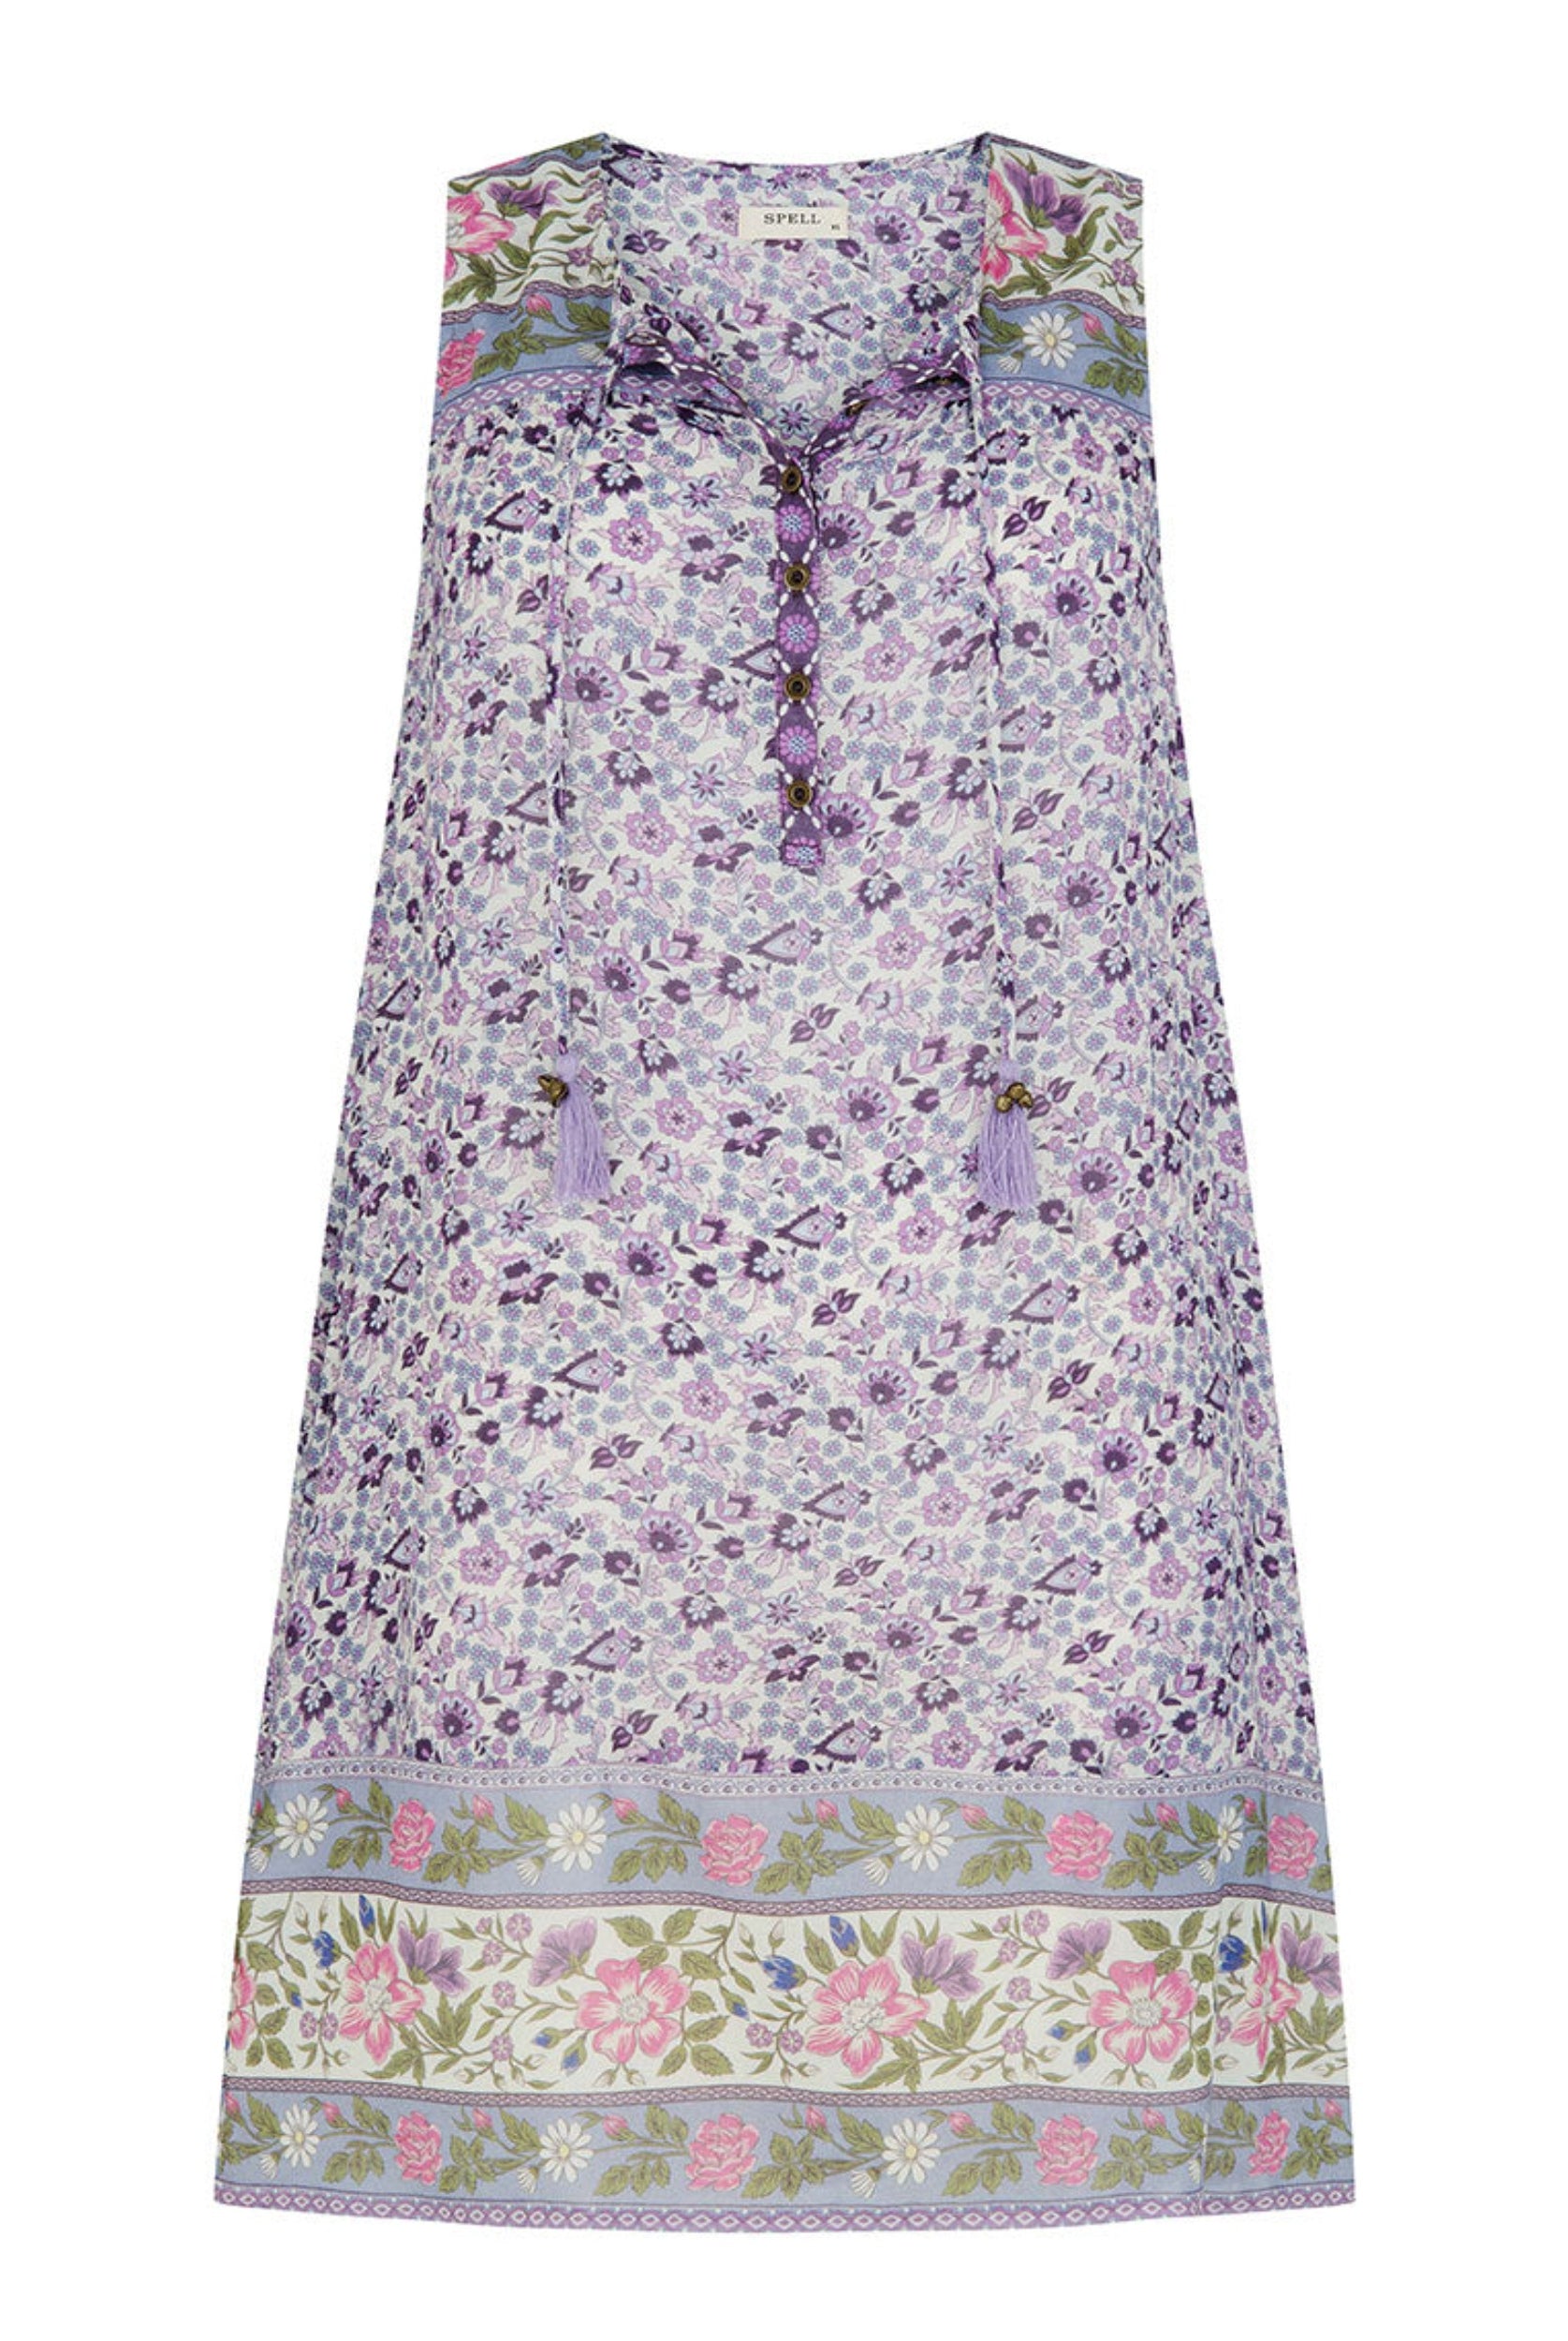 Spell Sienna Tunic Dress in Lilac 